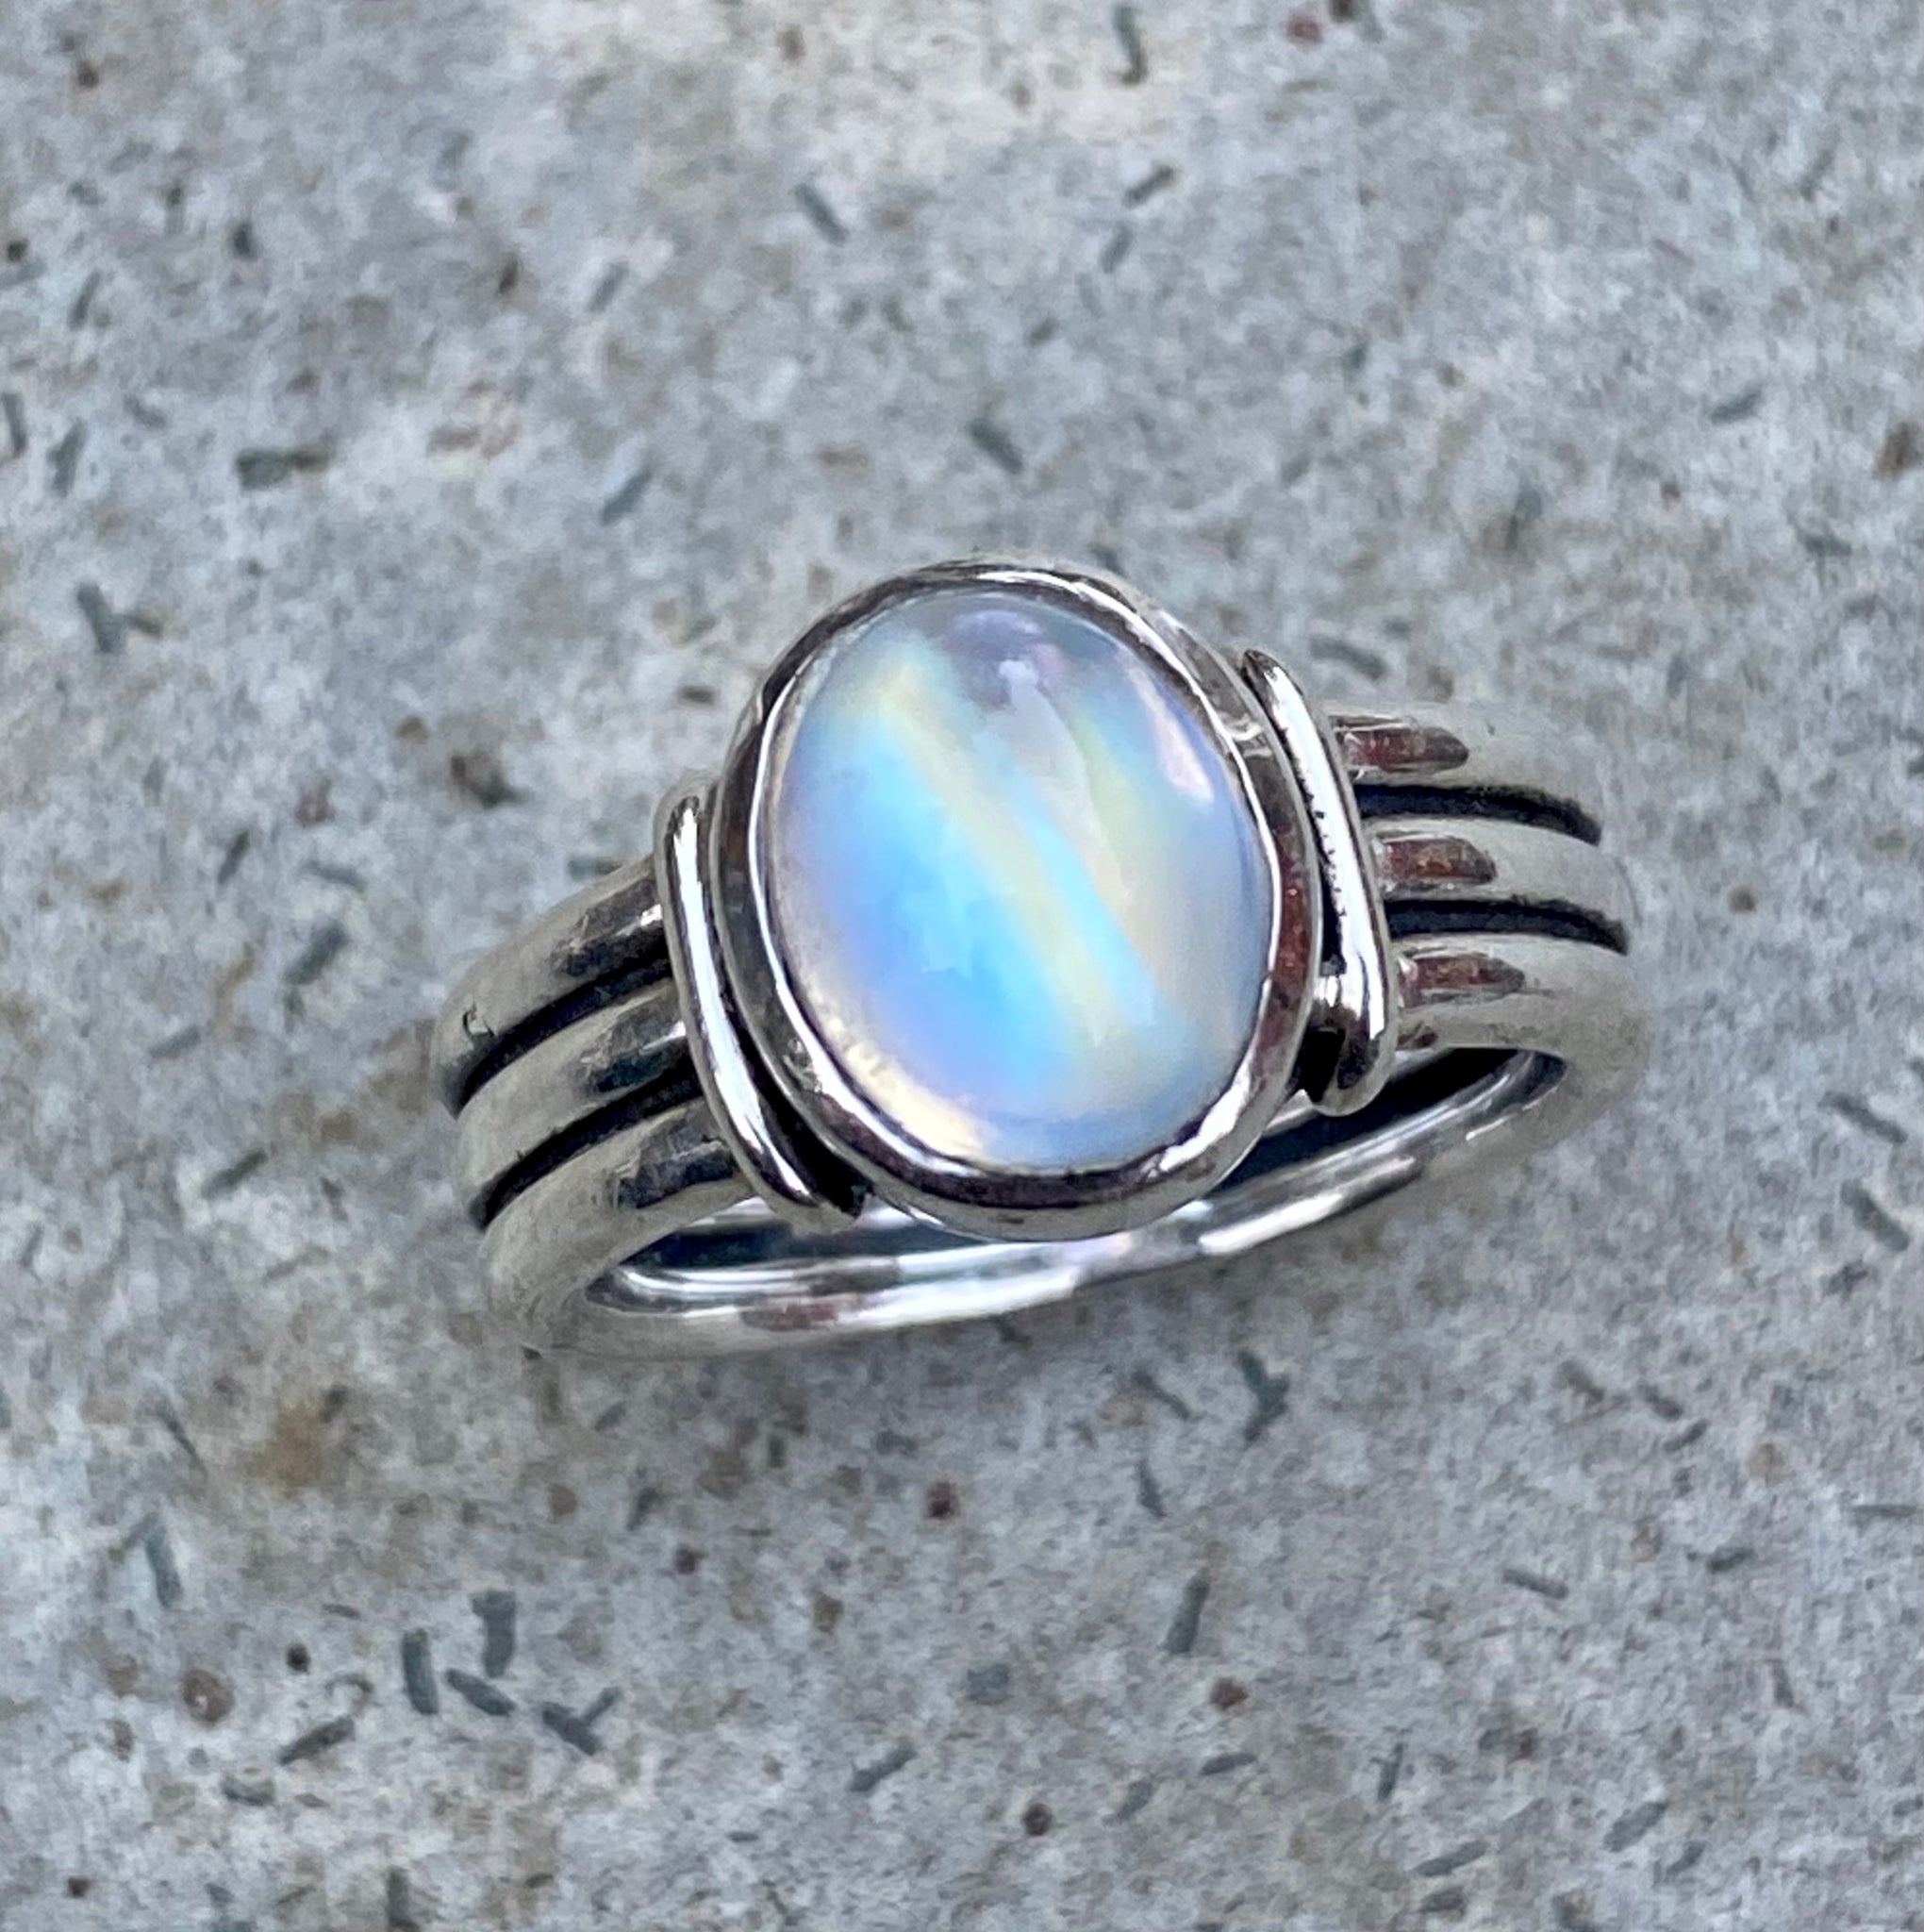 Moonstone Rings by Moon Magic | Worldwide Delivery